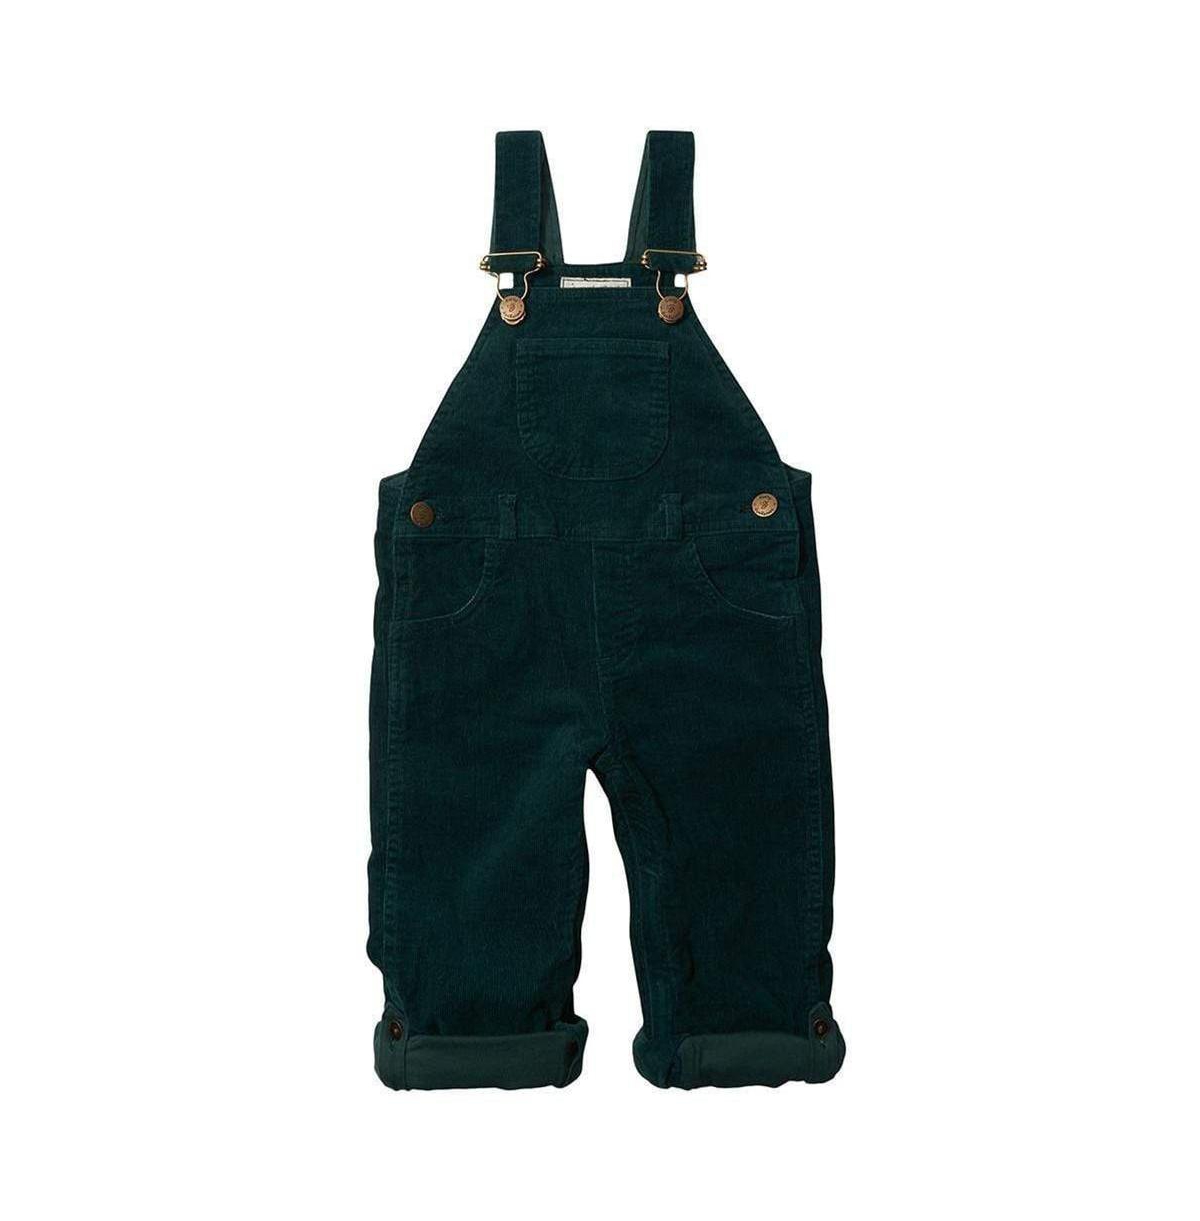 Dotty Dungarees Child Girl And Child Boy Corduroy Overalls In Moss Green